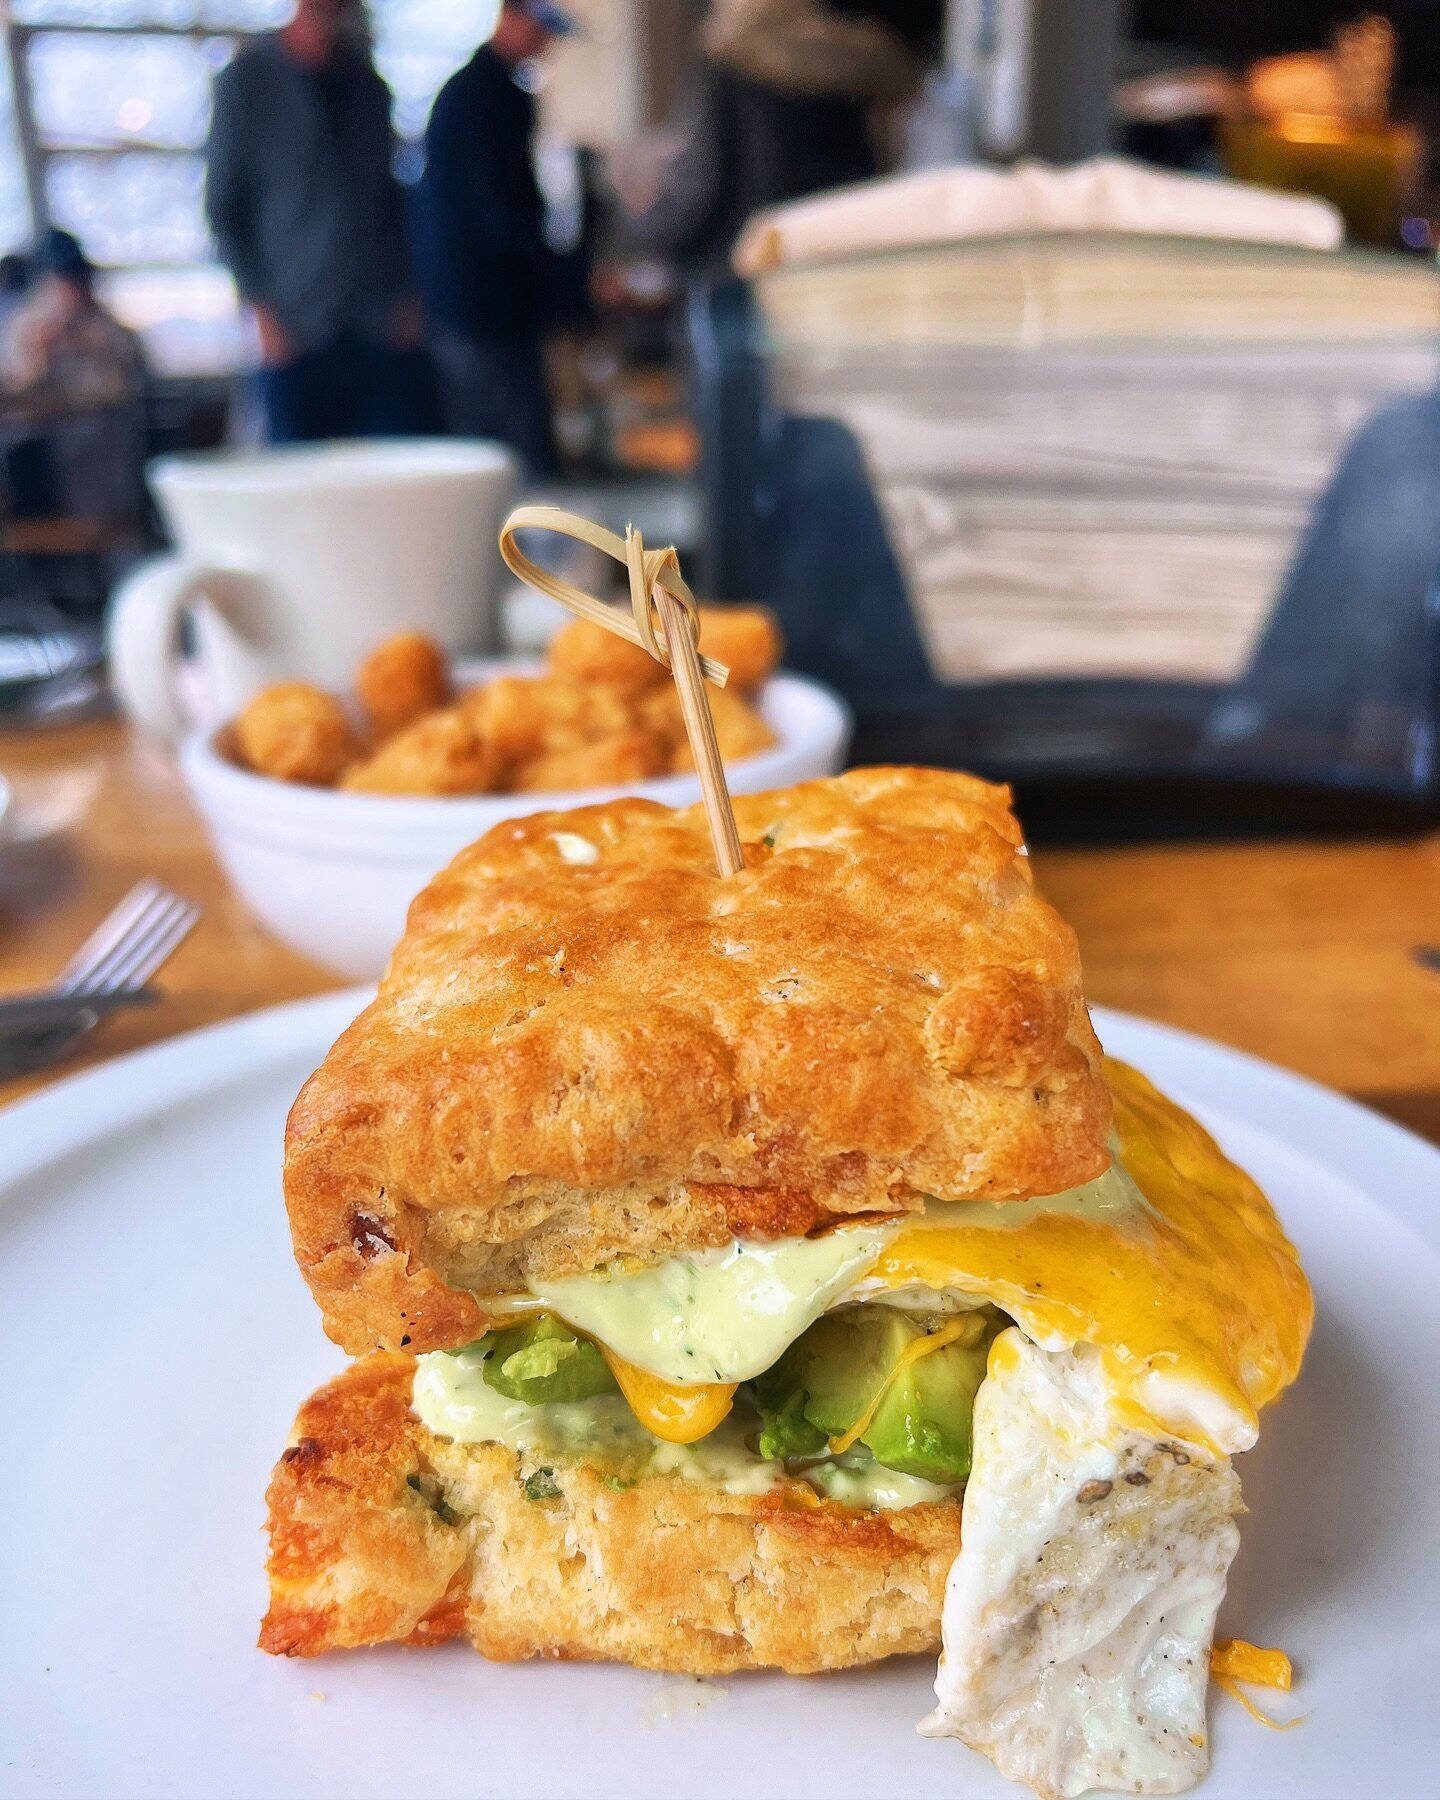 DINE // Enjoyed this delicious breakfast spot in #Asheville this am @alldaydarlingasheville ~ latte + egg, cheese + avocado biscuit before heading back to Raleigh.
 #avleats #ashevillebreakfast #visitasheville #birthdayweekend #alldaydarling